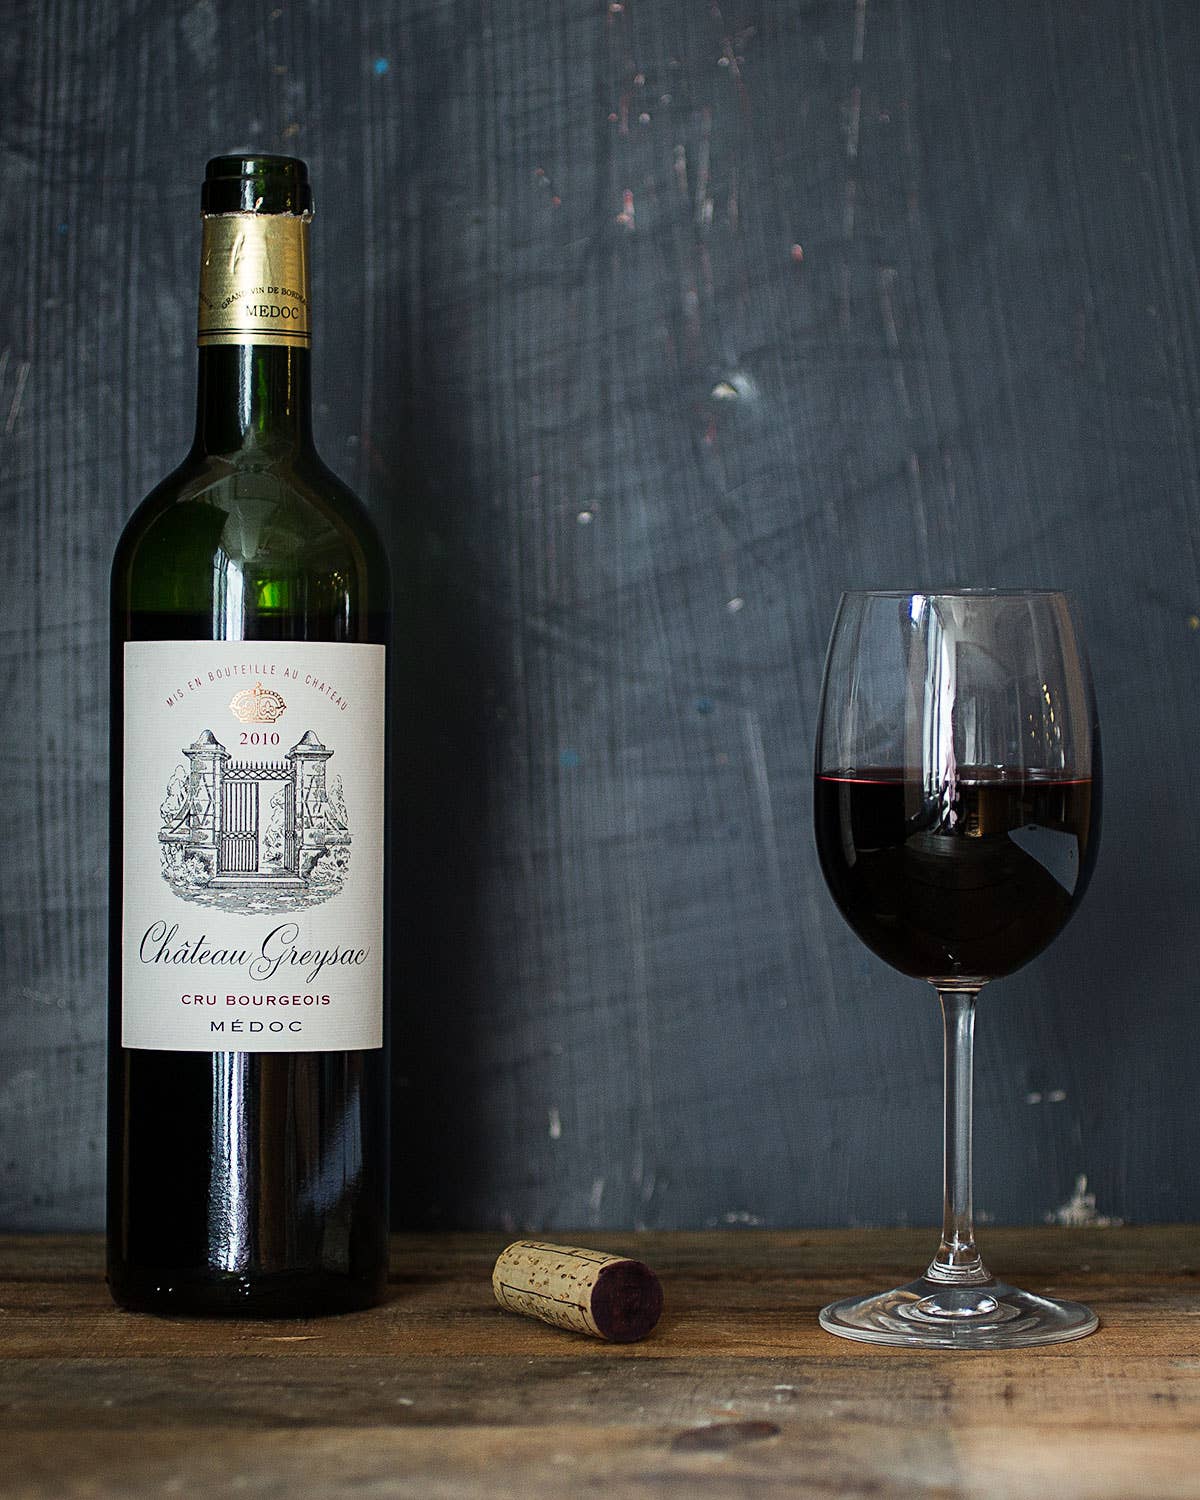 Drinking Bordeaux on A Budget: Yes, You Can